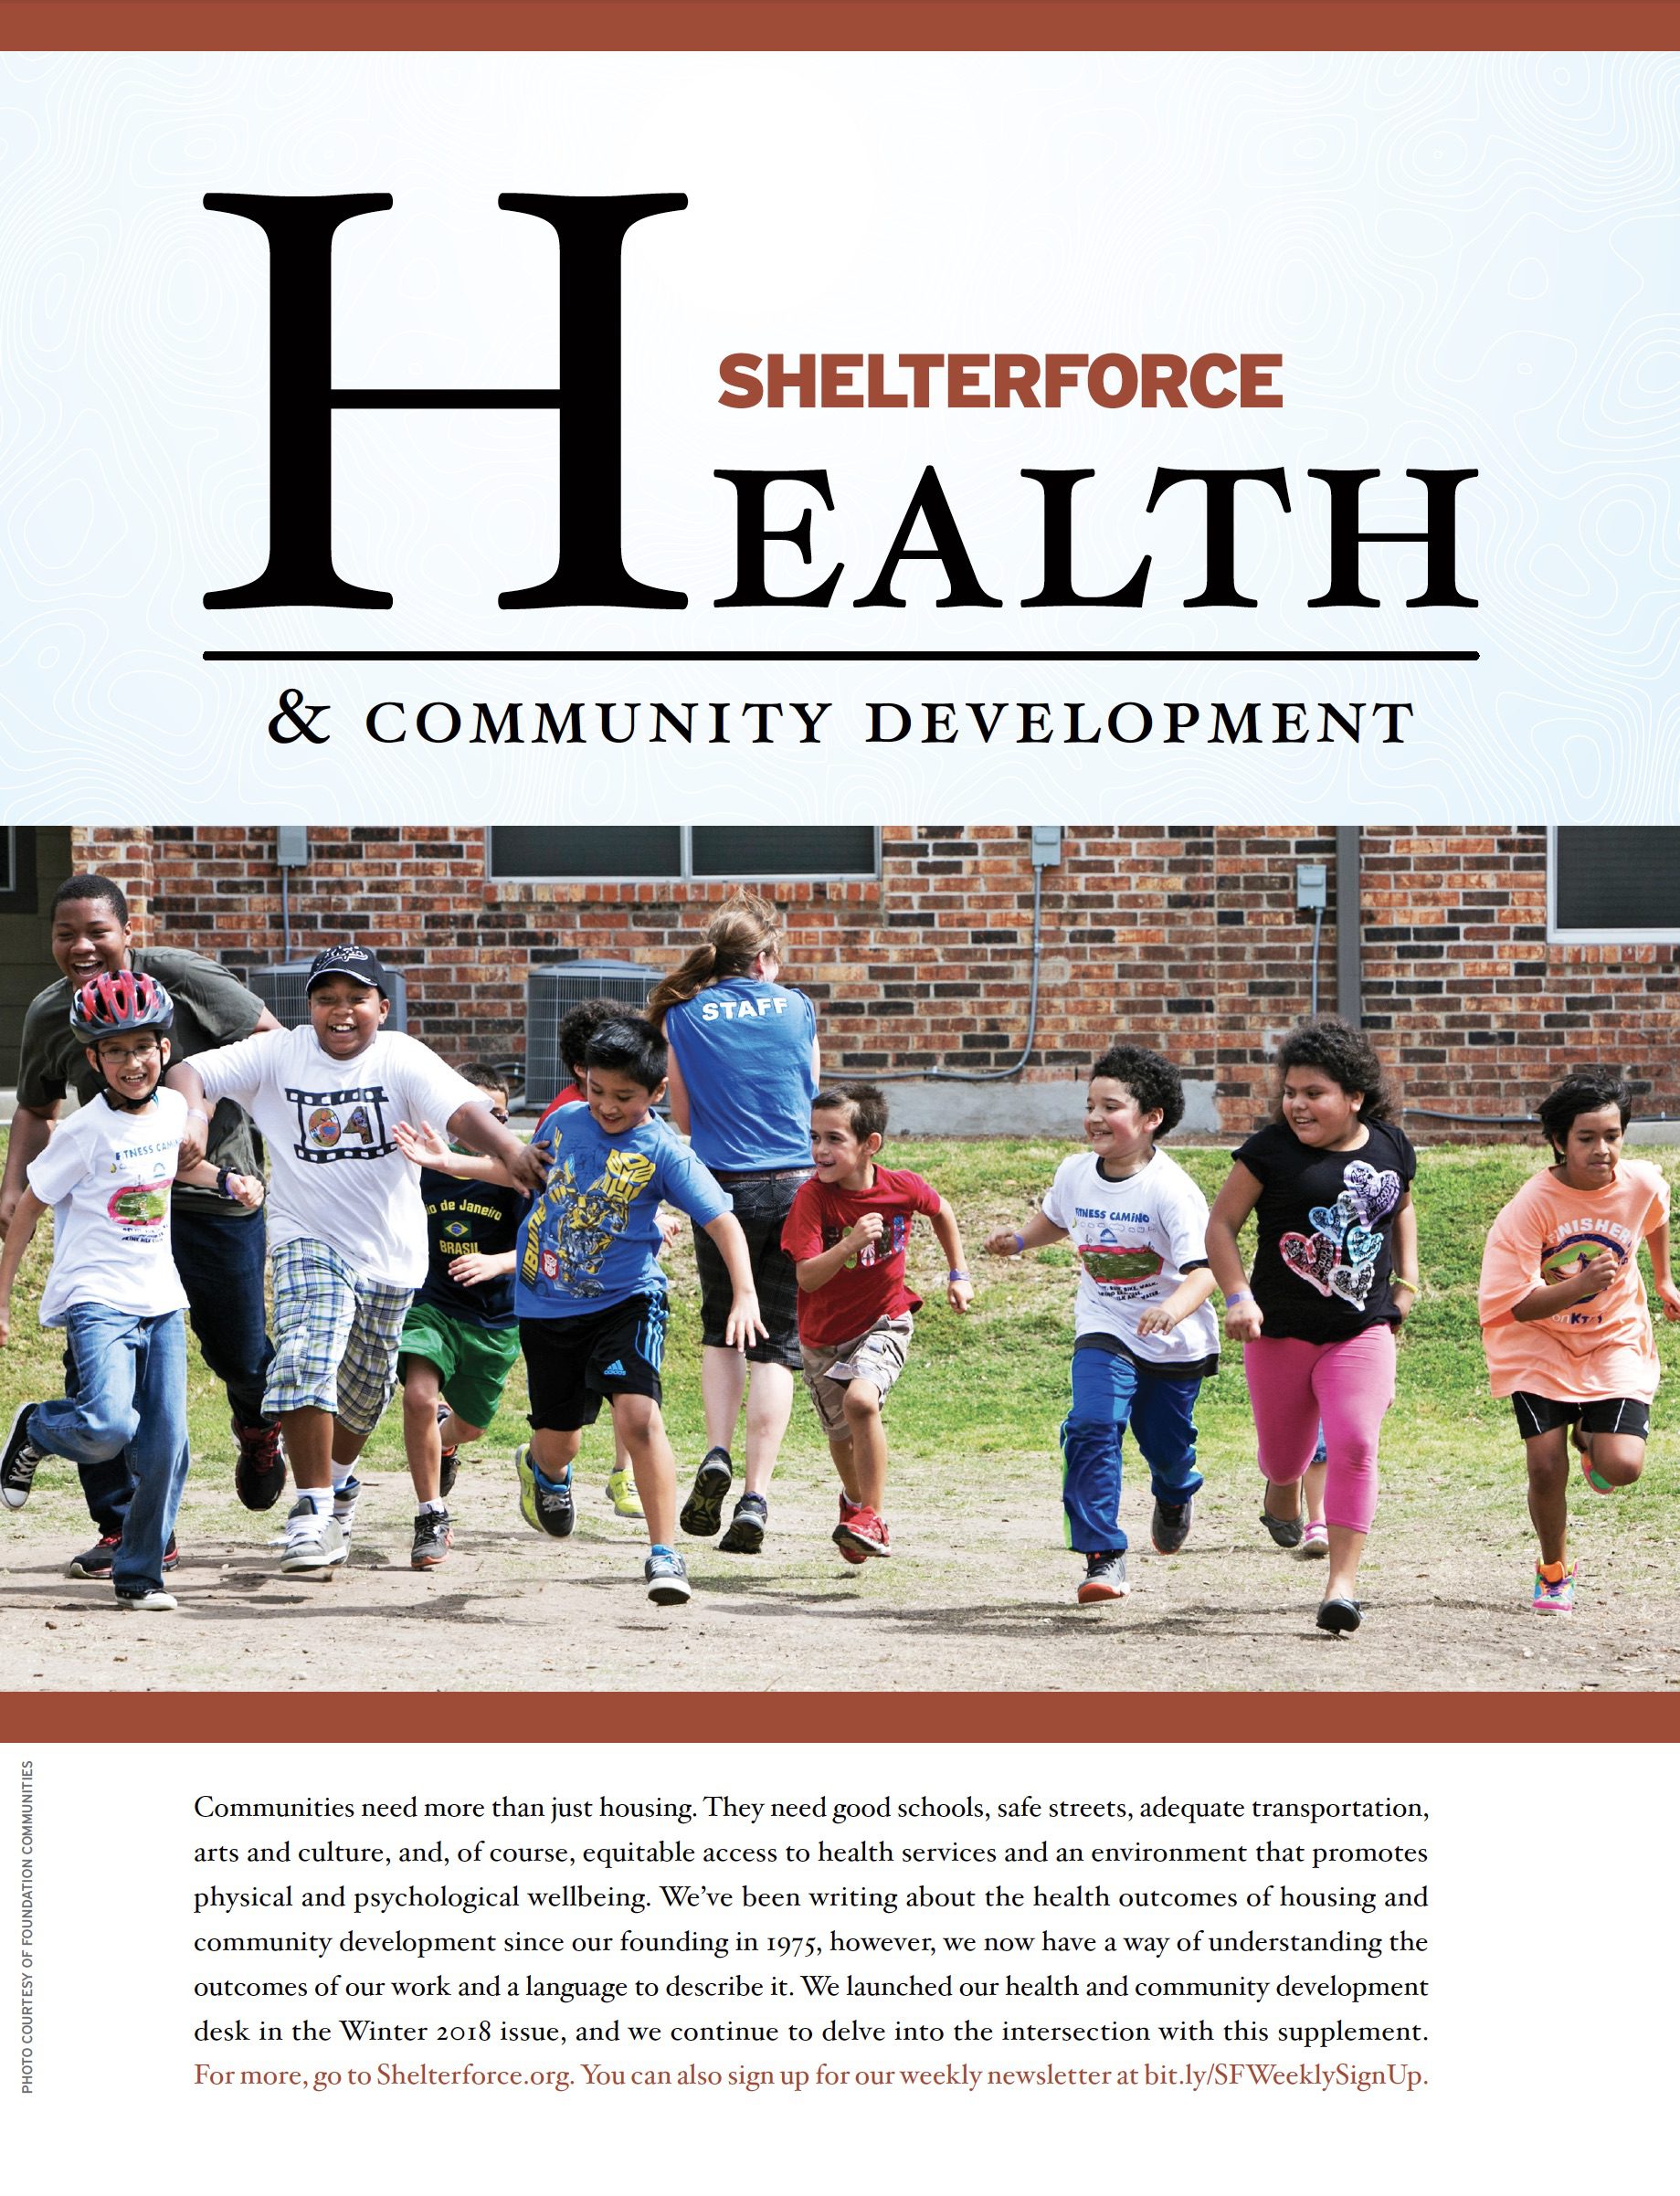 In our first Health and Community Development supplement, which ran in the Spring 2018 edition of Shelterforce magazine, we focus on community development board members who are from the health field, and census tracts and health.